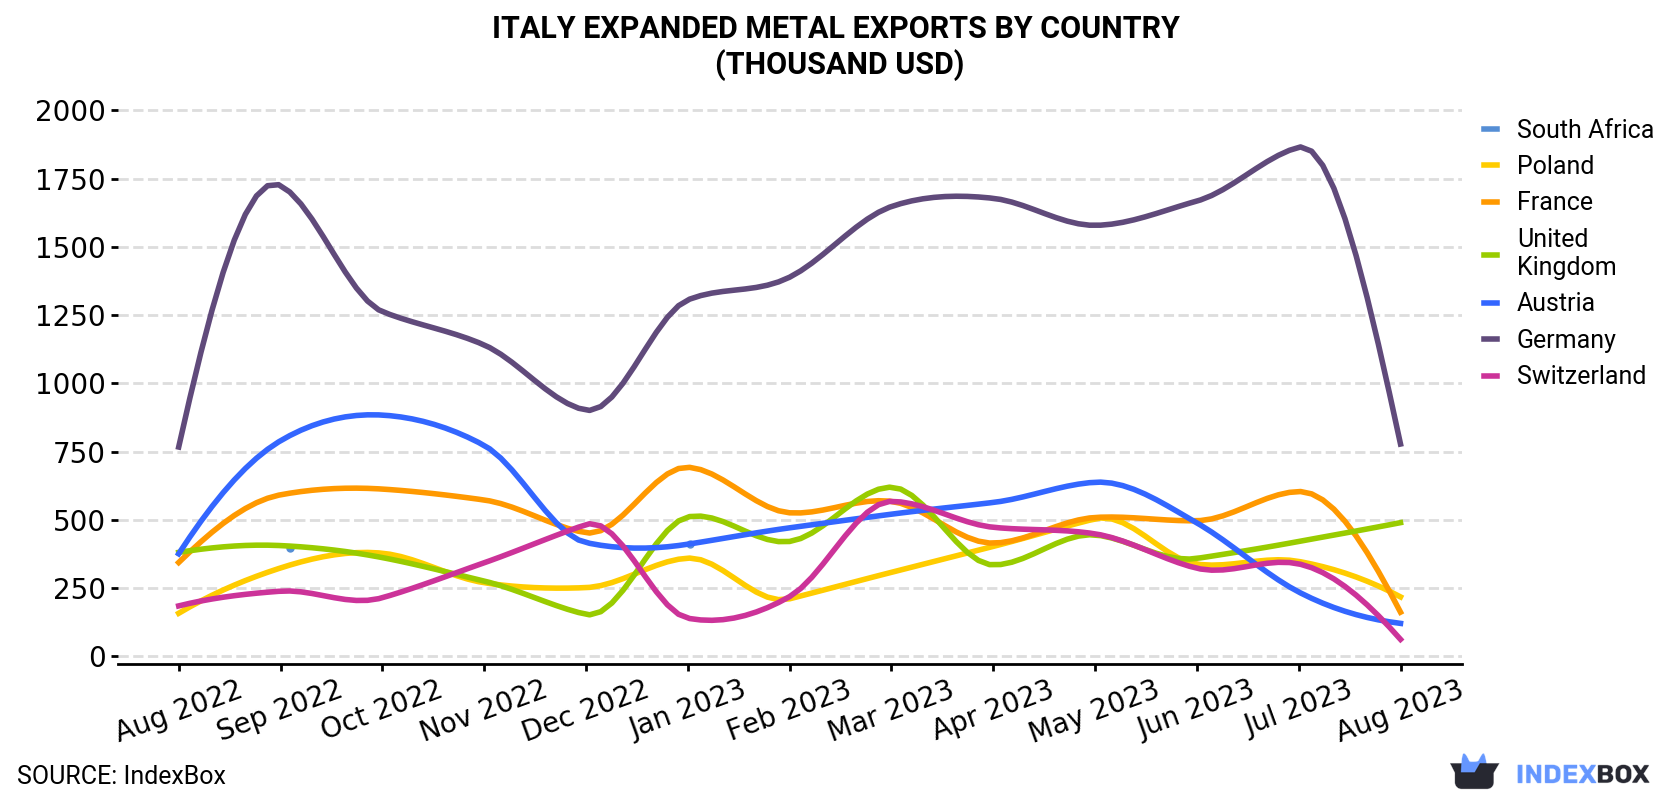 Italy Expanded Metal Exports By Country (Thousand USD)